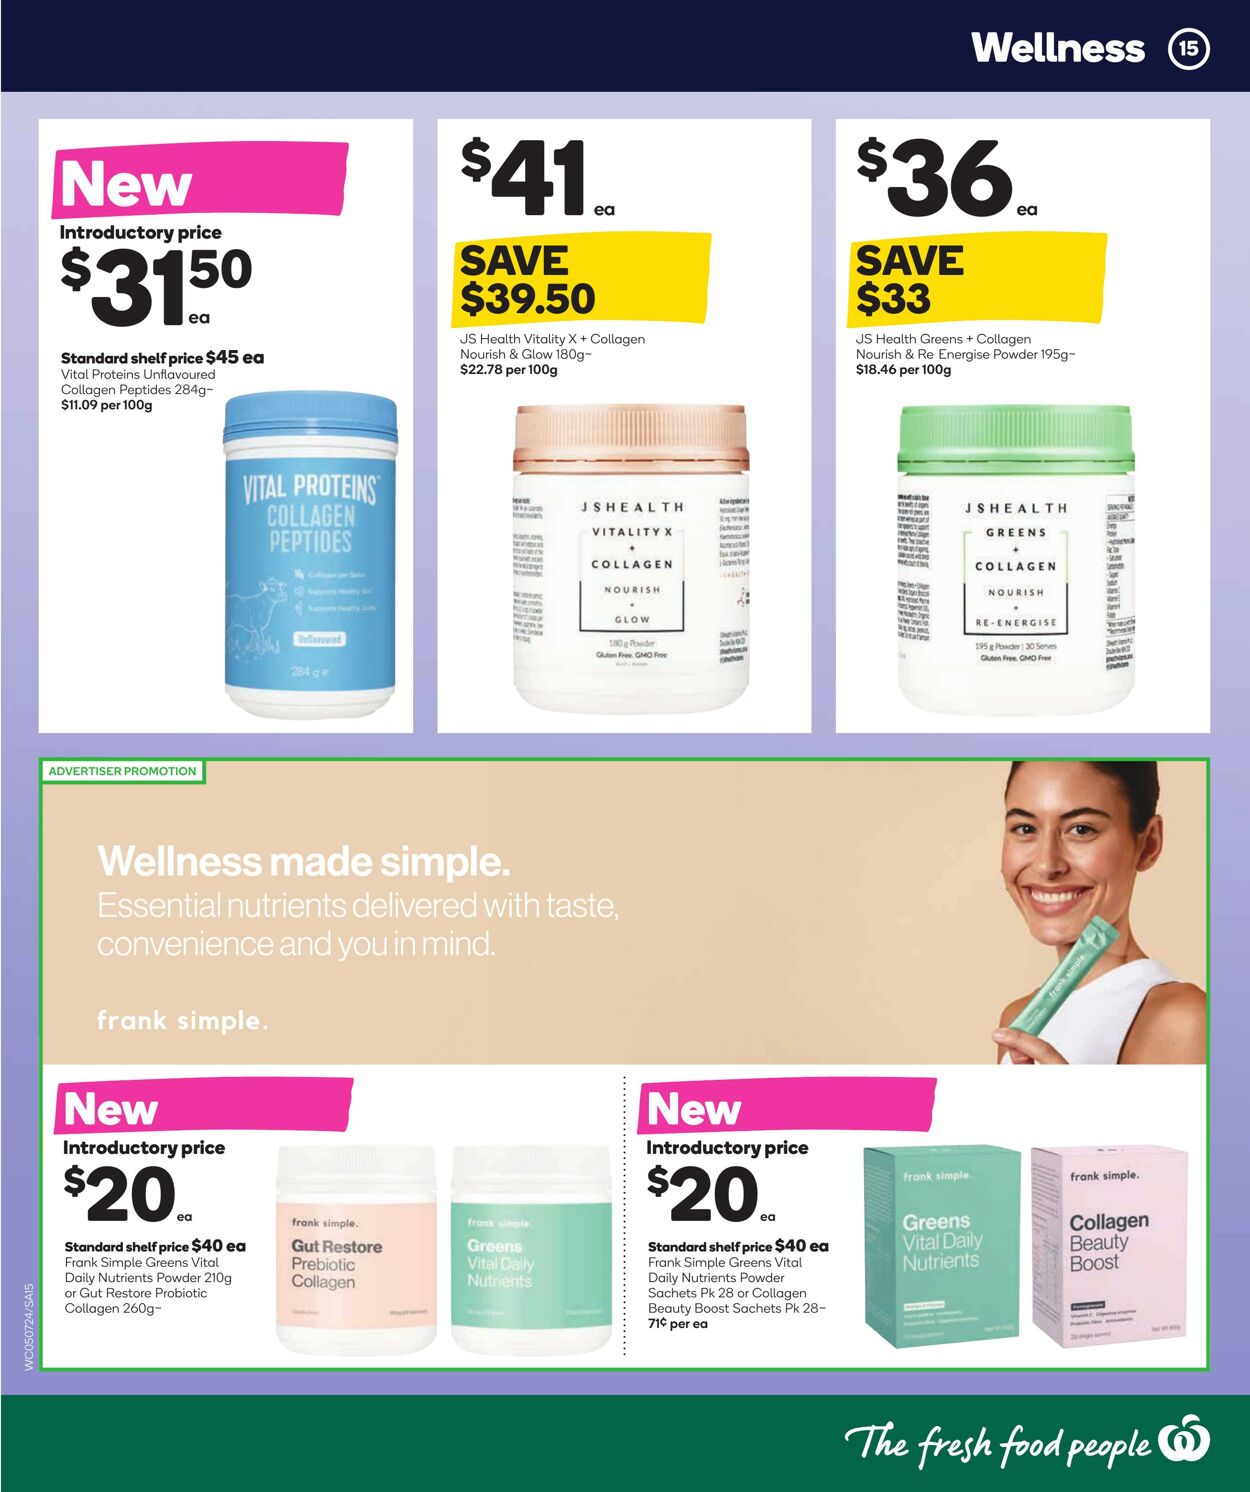 Catalogue Woolworths 05.07.2023 - 11.07.2023